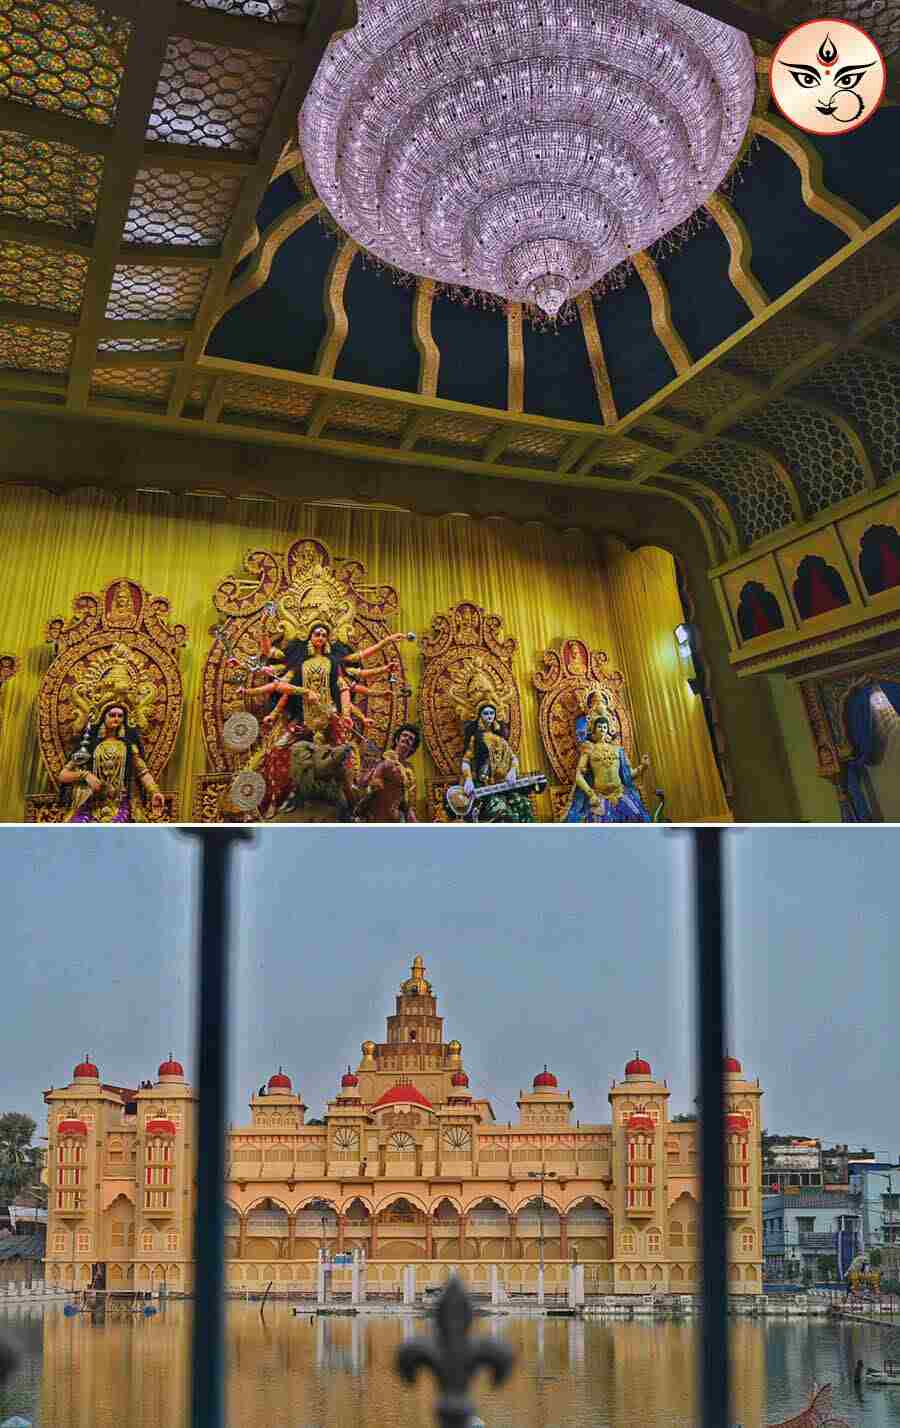 The College Square Durga Puja pandal has been built as a replica of the Mysore Palace 